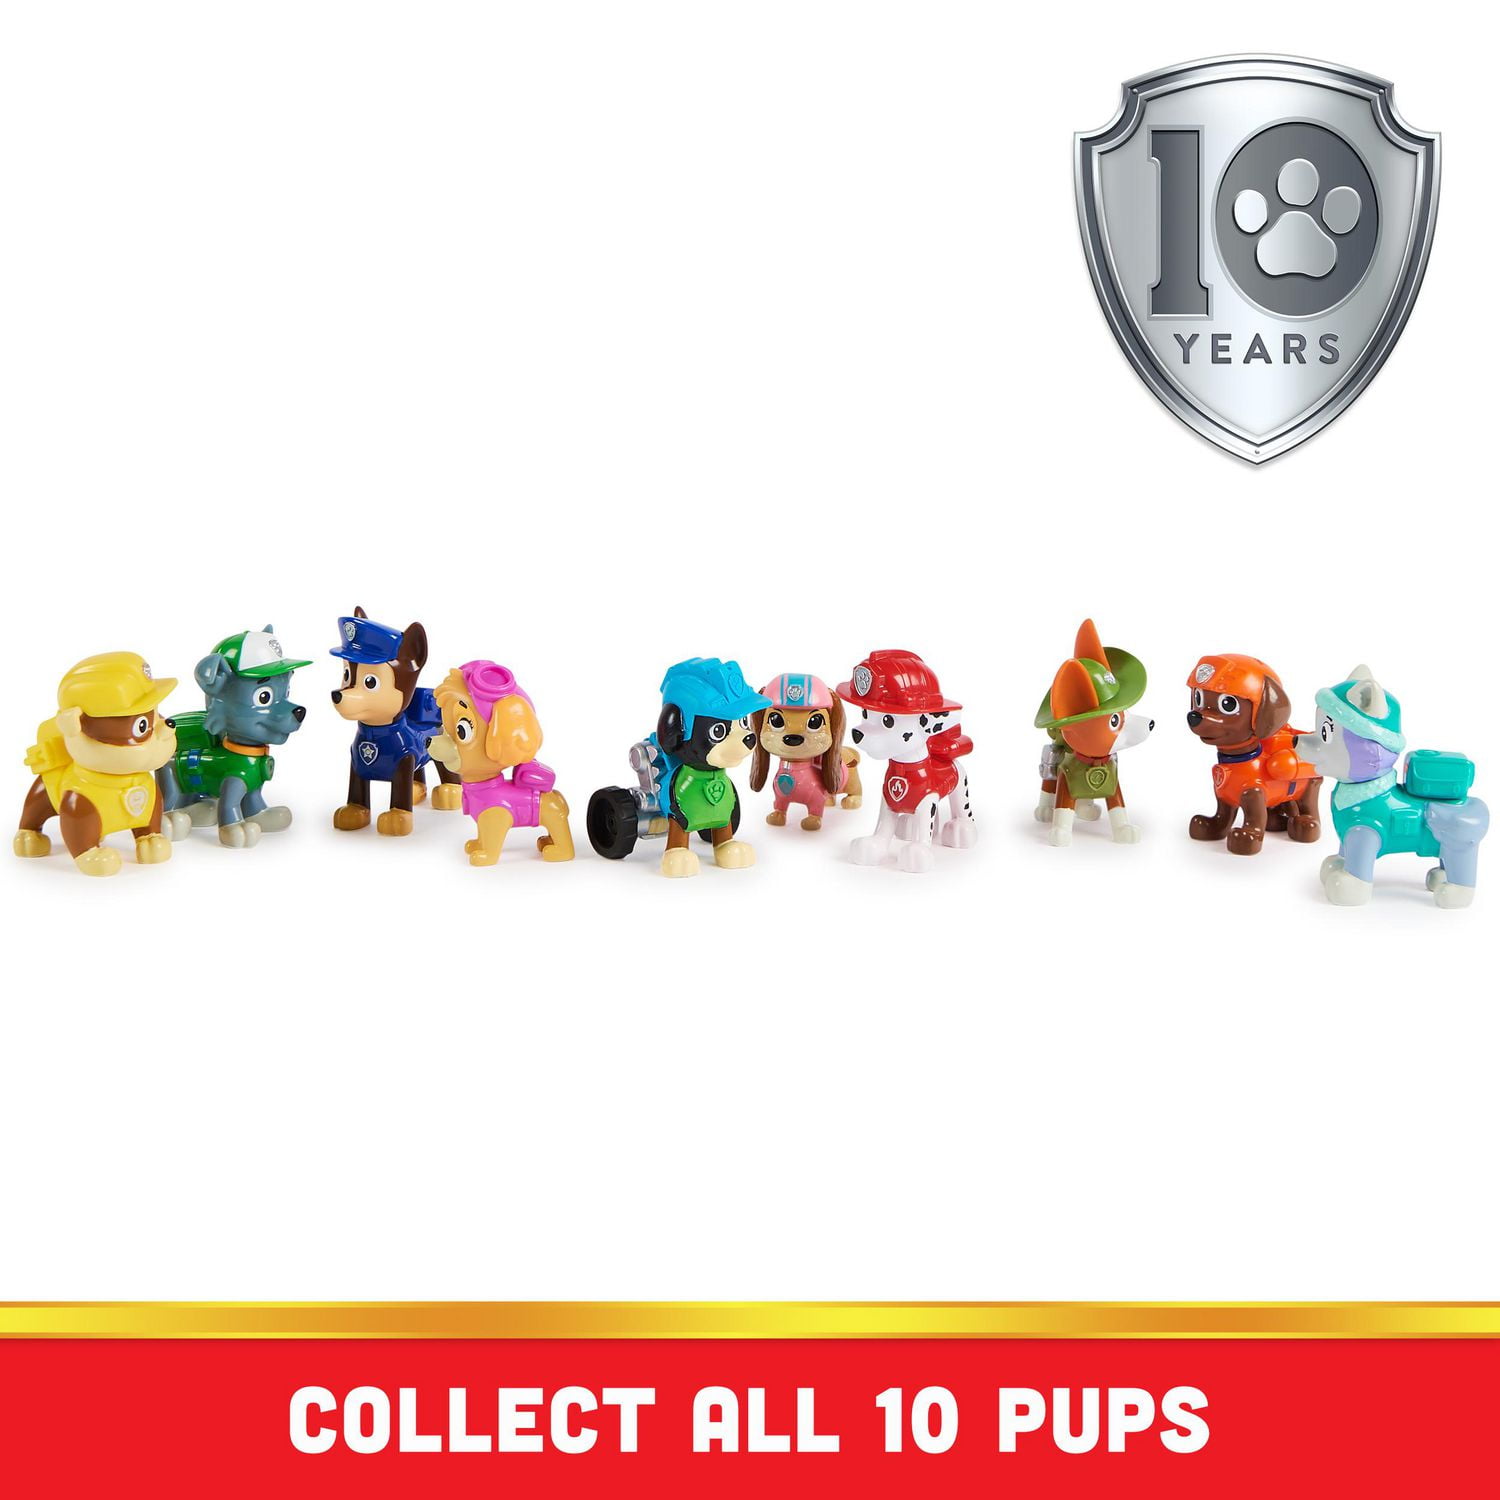 PAW Patrol, 10th Anniversary, All Paws On Deck Toy Figures Gift